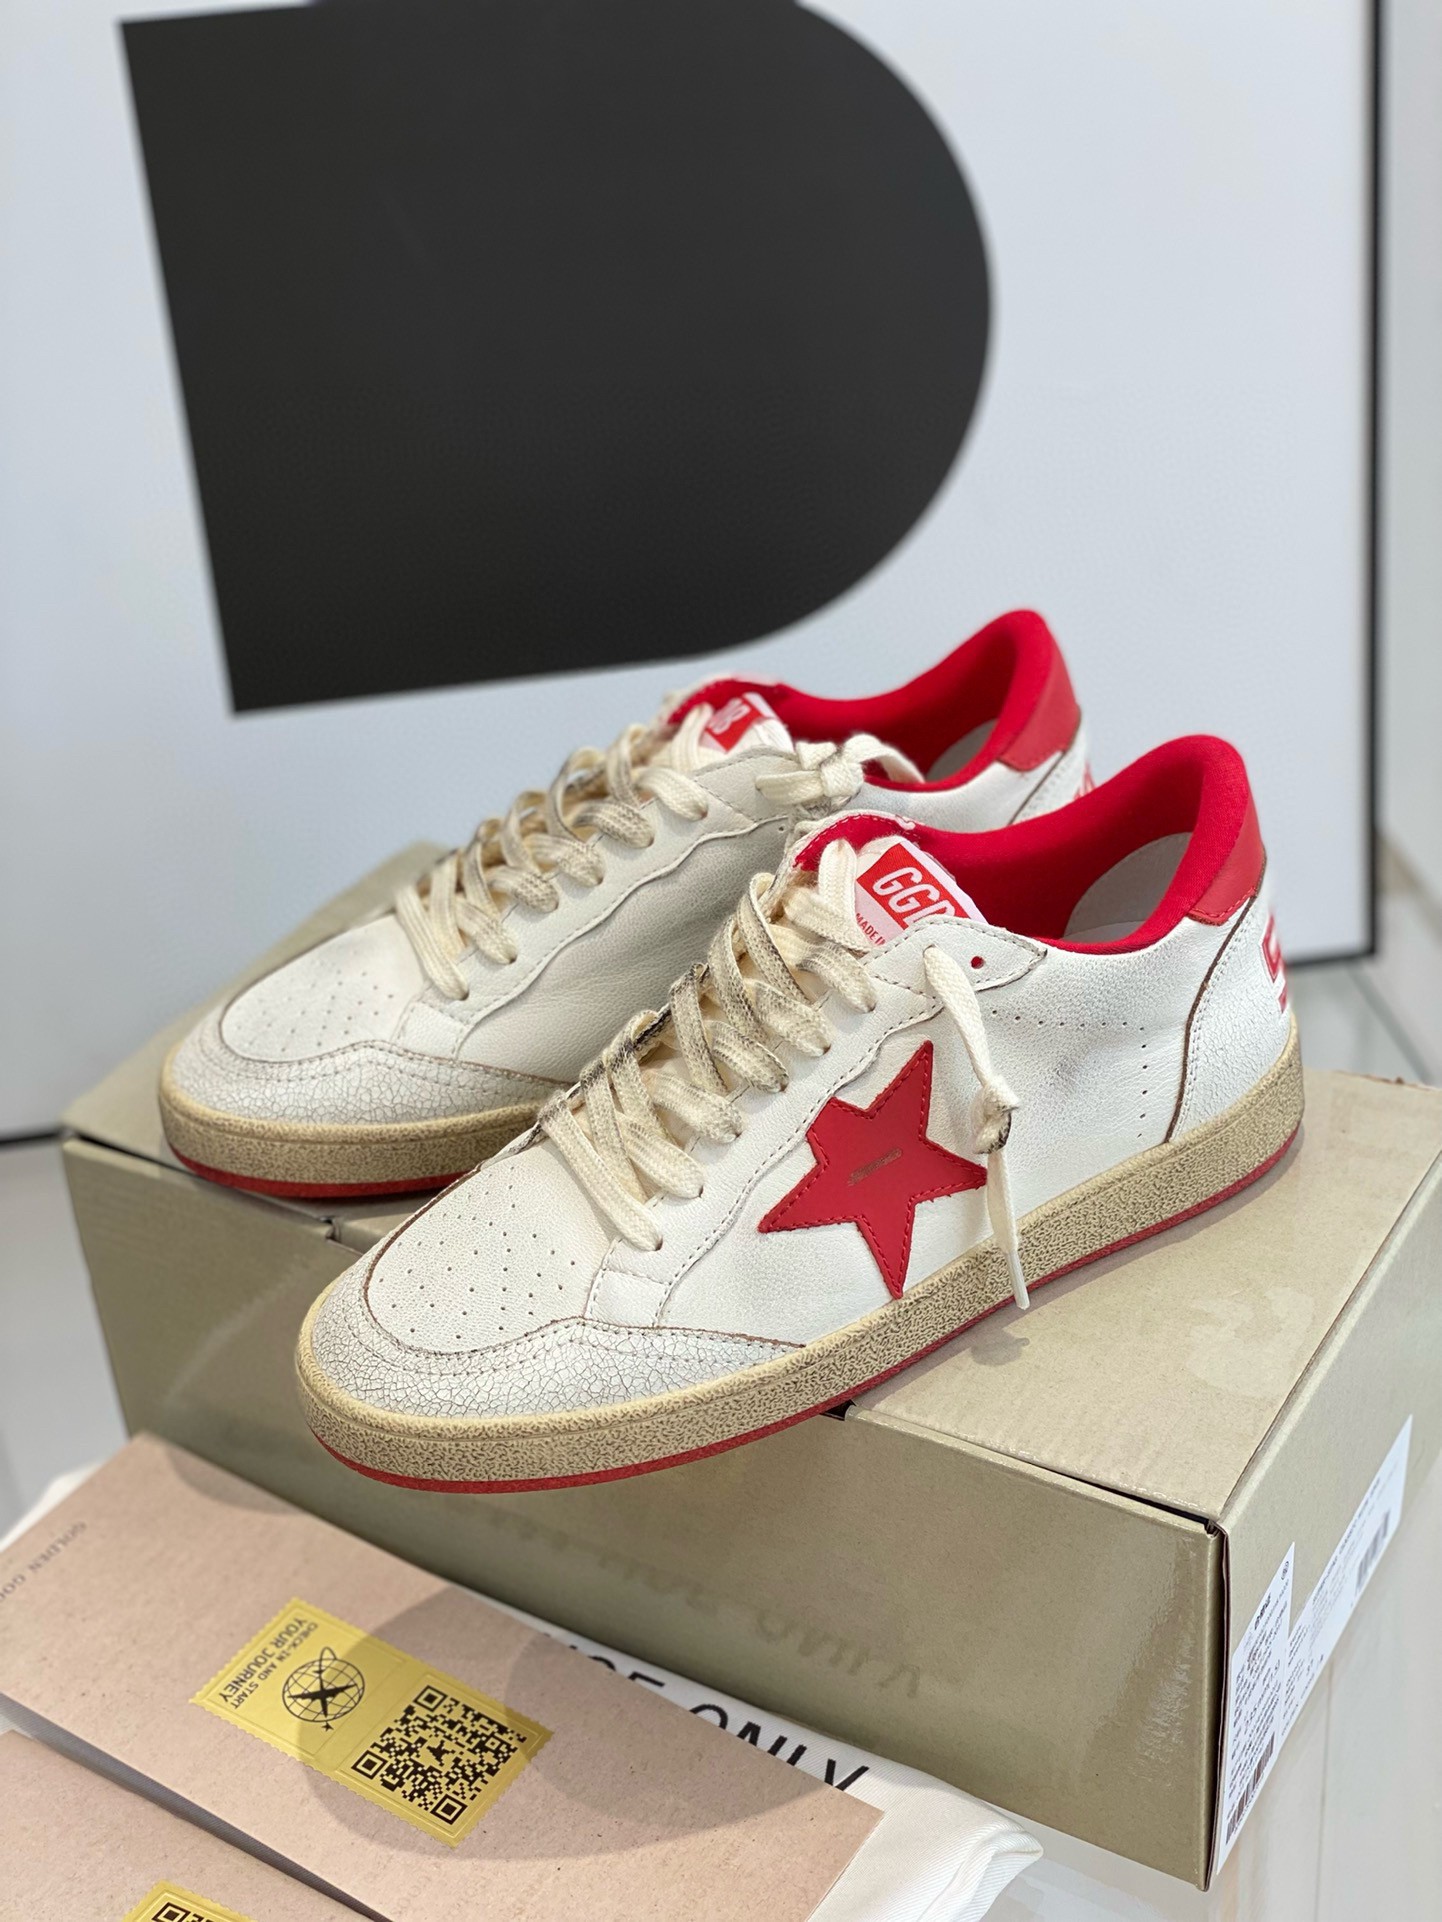 Replica Golden Goose Women\'s Ball Star Sneakers with Red Star and Heel Tab